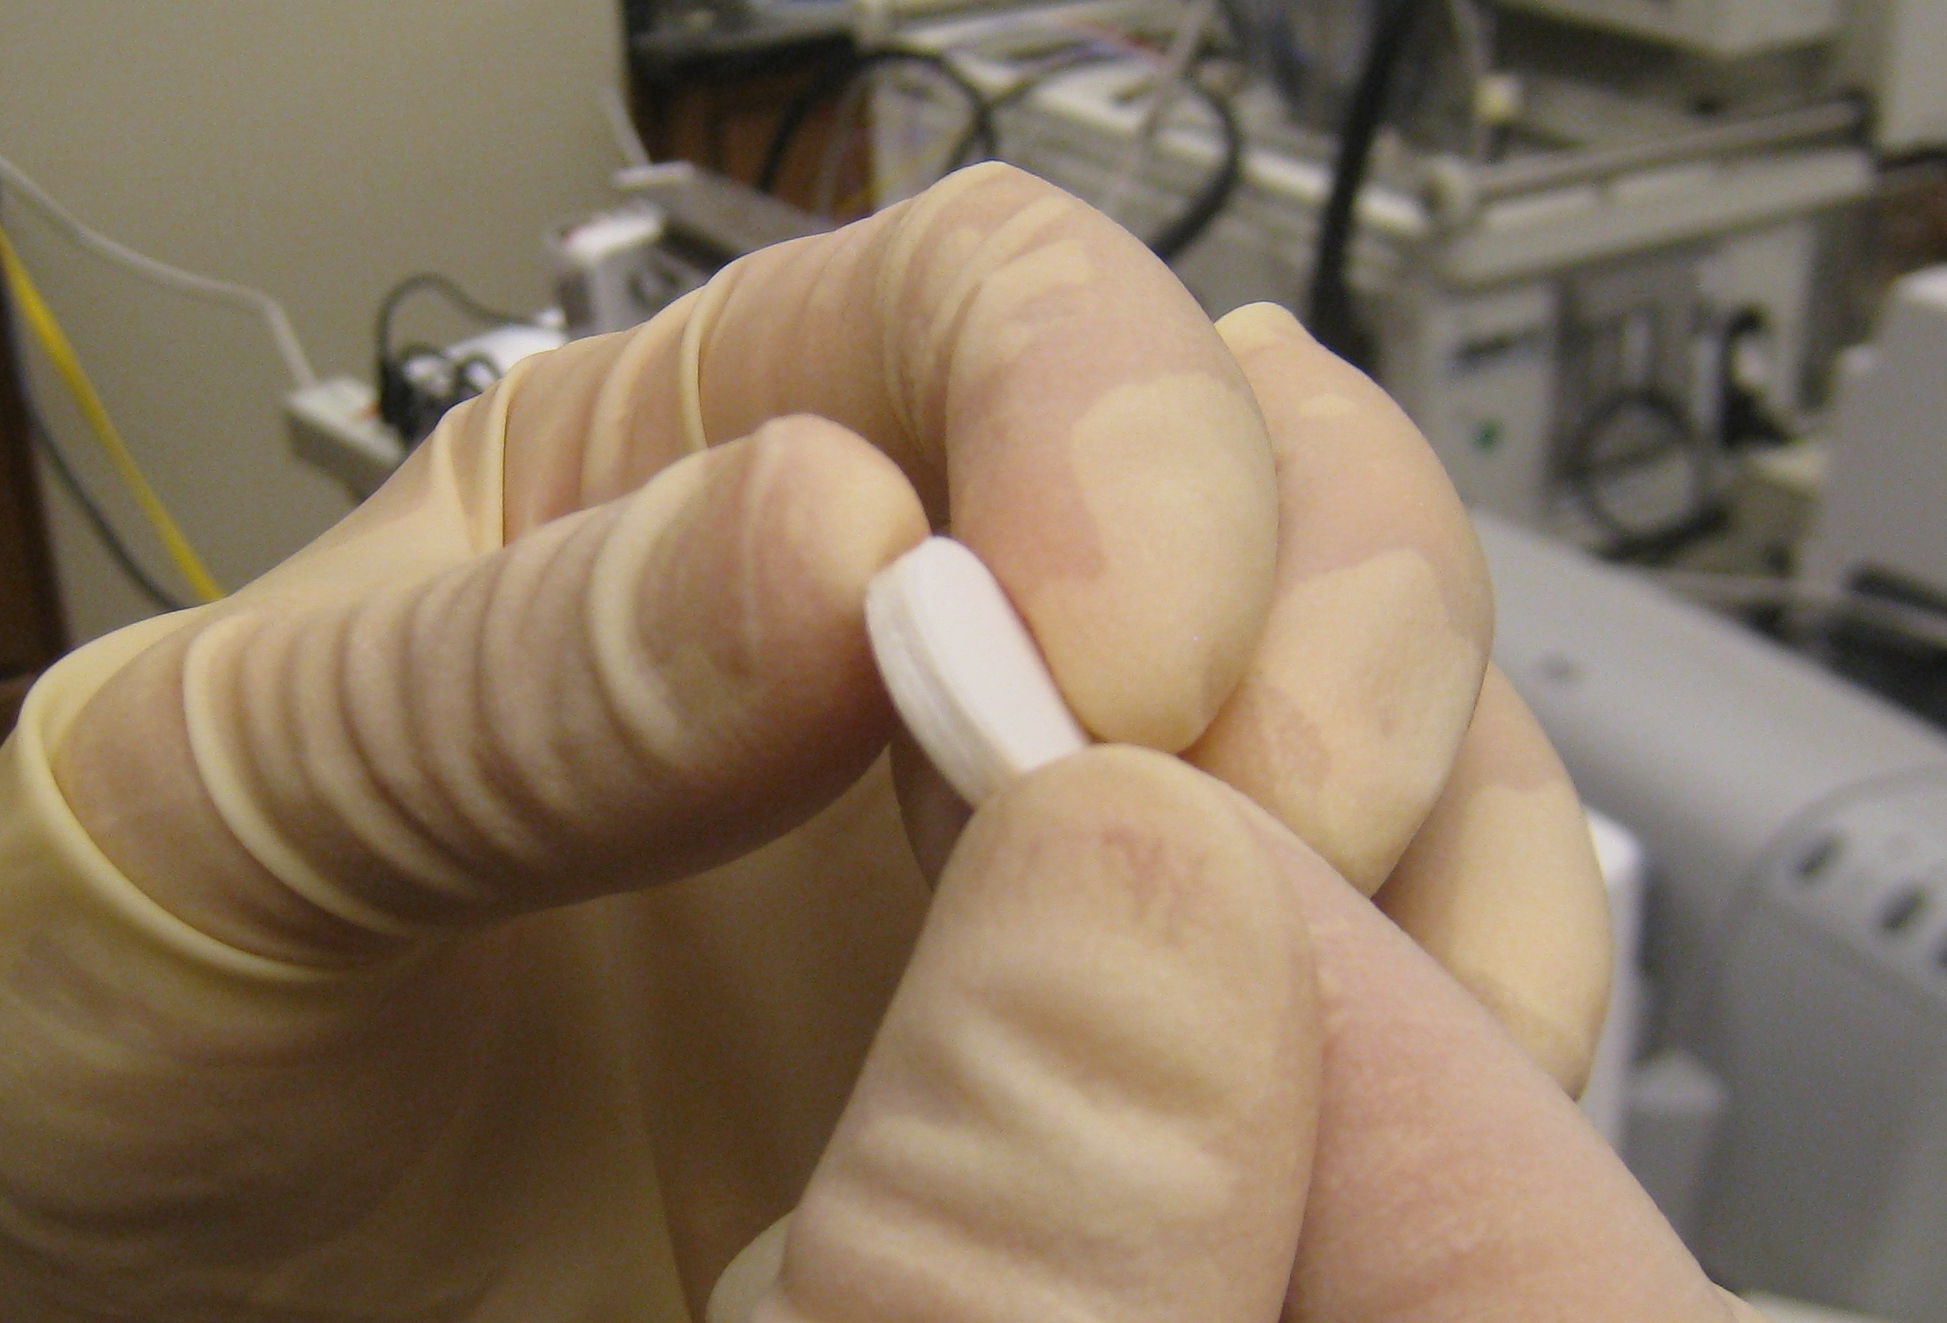 Fingers covered in off-white latex gloves hold a white pill with lab equipment in the blurred background.